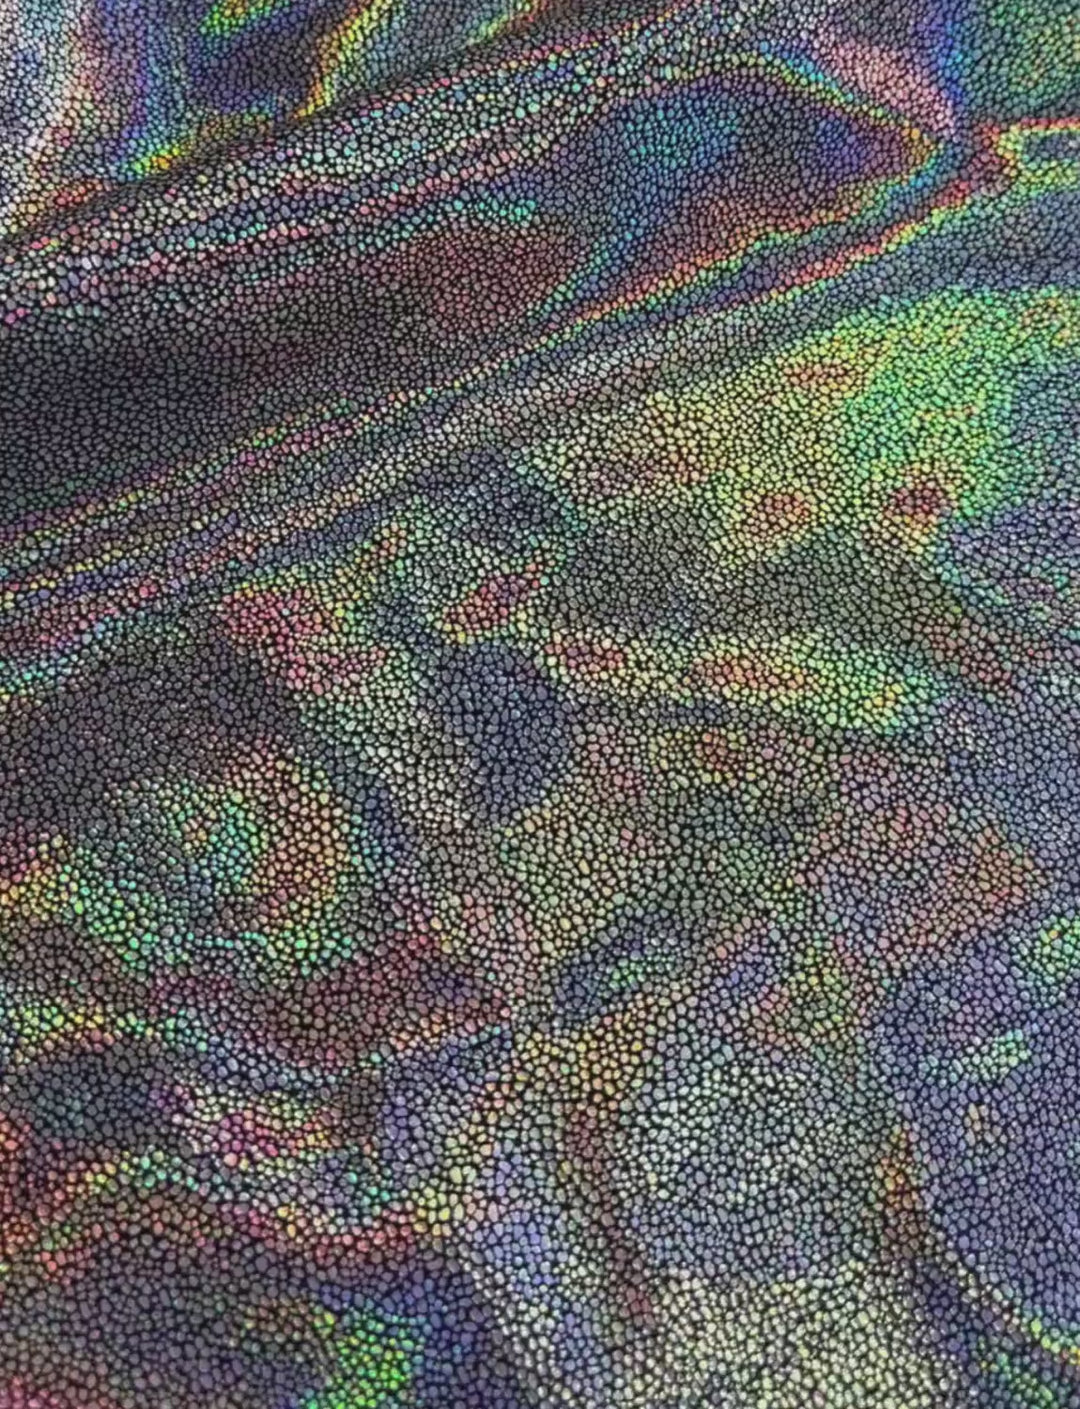 Silver holographic foiled spandex.